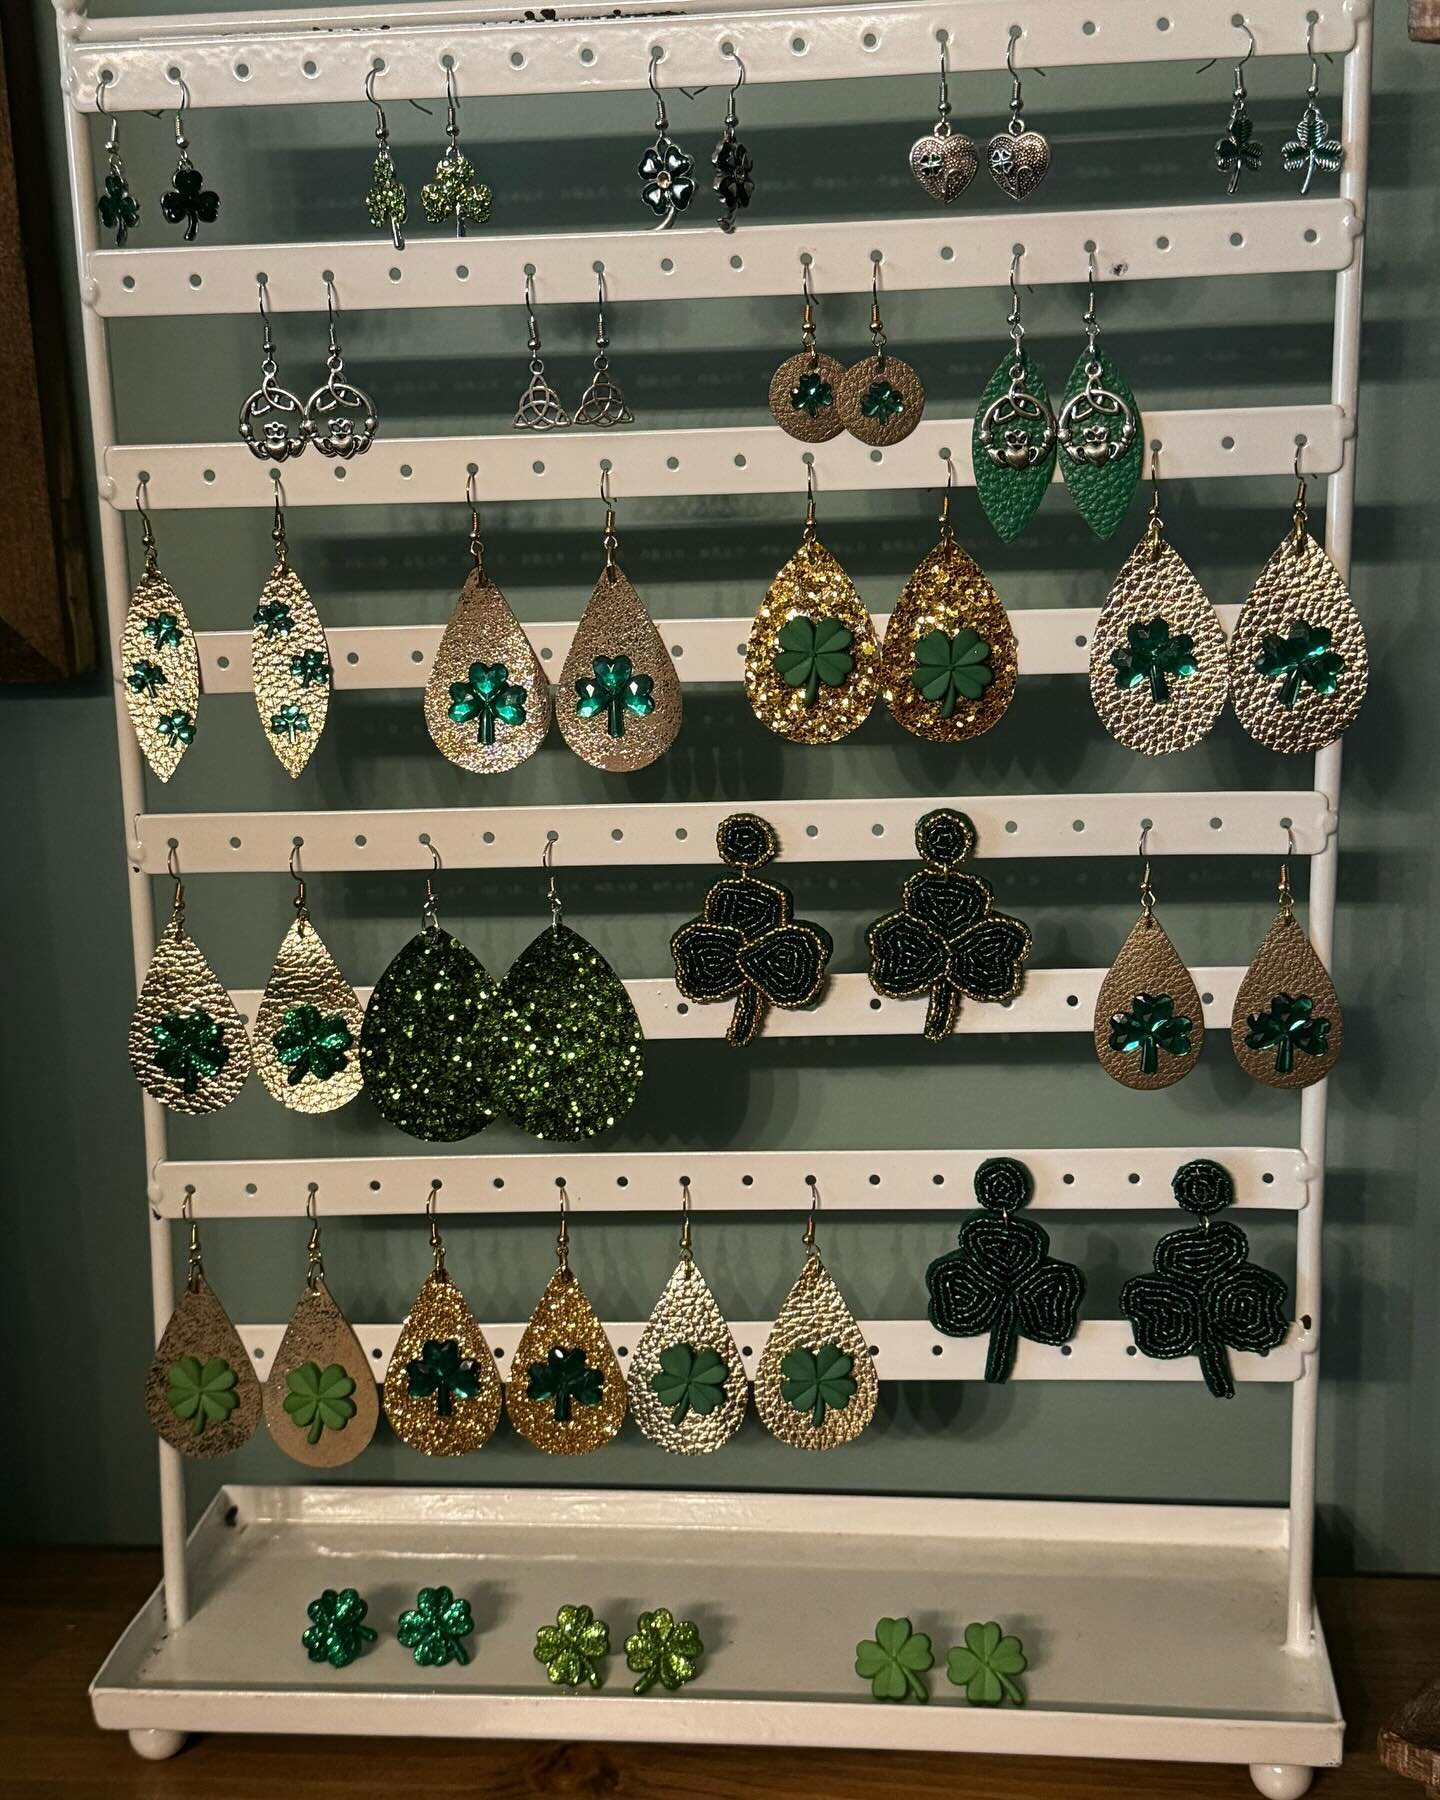 All St Patrick&rsquo;s Day earrings $10!  Every order comes with an 8.5 x 6&rdquo; cutting board to celebrate my 5th anniversary!  Message or text me at 704-280-6132 for orders!